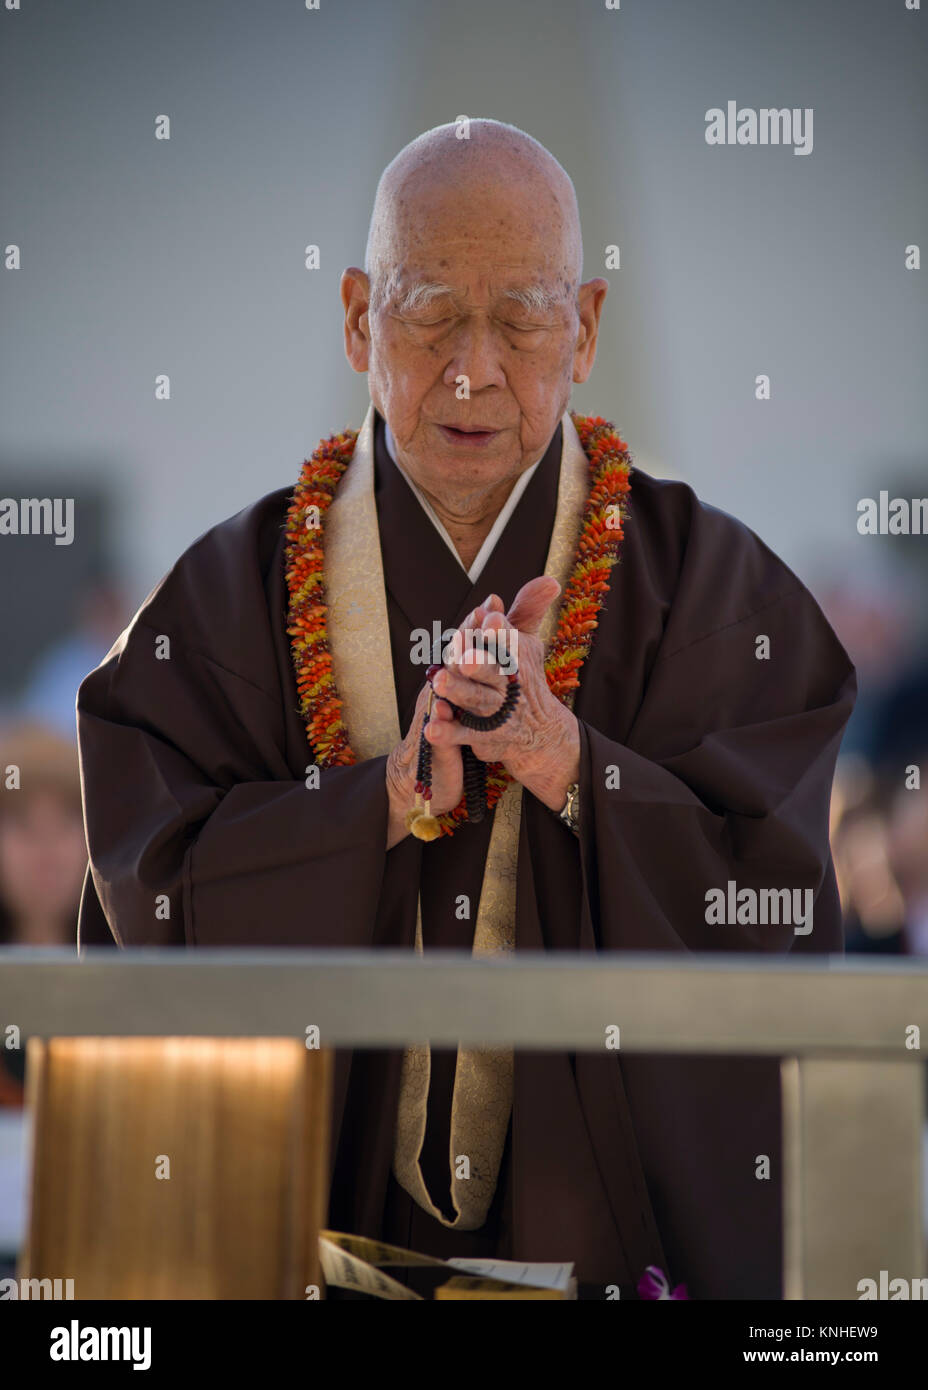 Buddhist monk Tendai Mission Bishop Ryokan Ara delivers a blessing during the Blackened Canteen ceremony at the USS Arizona Memorial during the 75th anniversary commemoration of the World War II attacks on Pearl Harbor December 6, 2016 in Pearl Harbor, Hawaii. The blackened canteen is a relic of a 1945 air raid over Japan and is used for pouring bourbon whiskey as an offering to the fallen in the waters of Pearl Harbor.(photo by PO2 Somers Steelman via Planetpix) Stock Photo